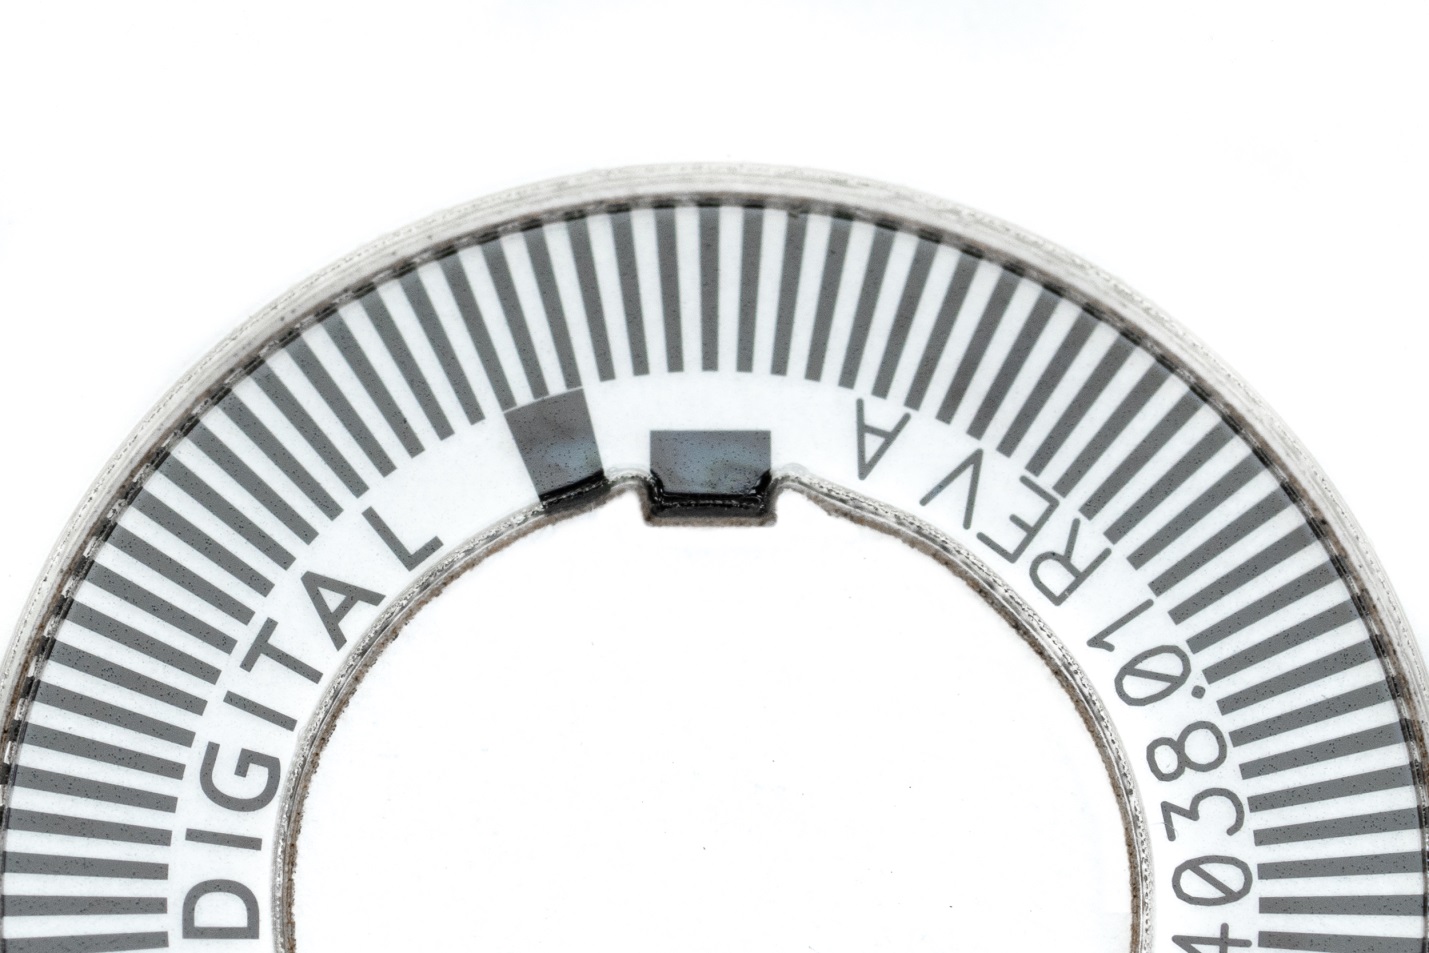 One of two tabs that protrude into the inner circle. The tabs fit into grooves on the hub and ensure that the small disk is held securely by the hub, a patent pending process.